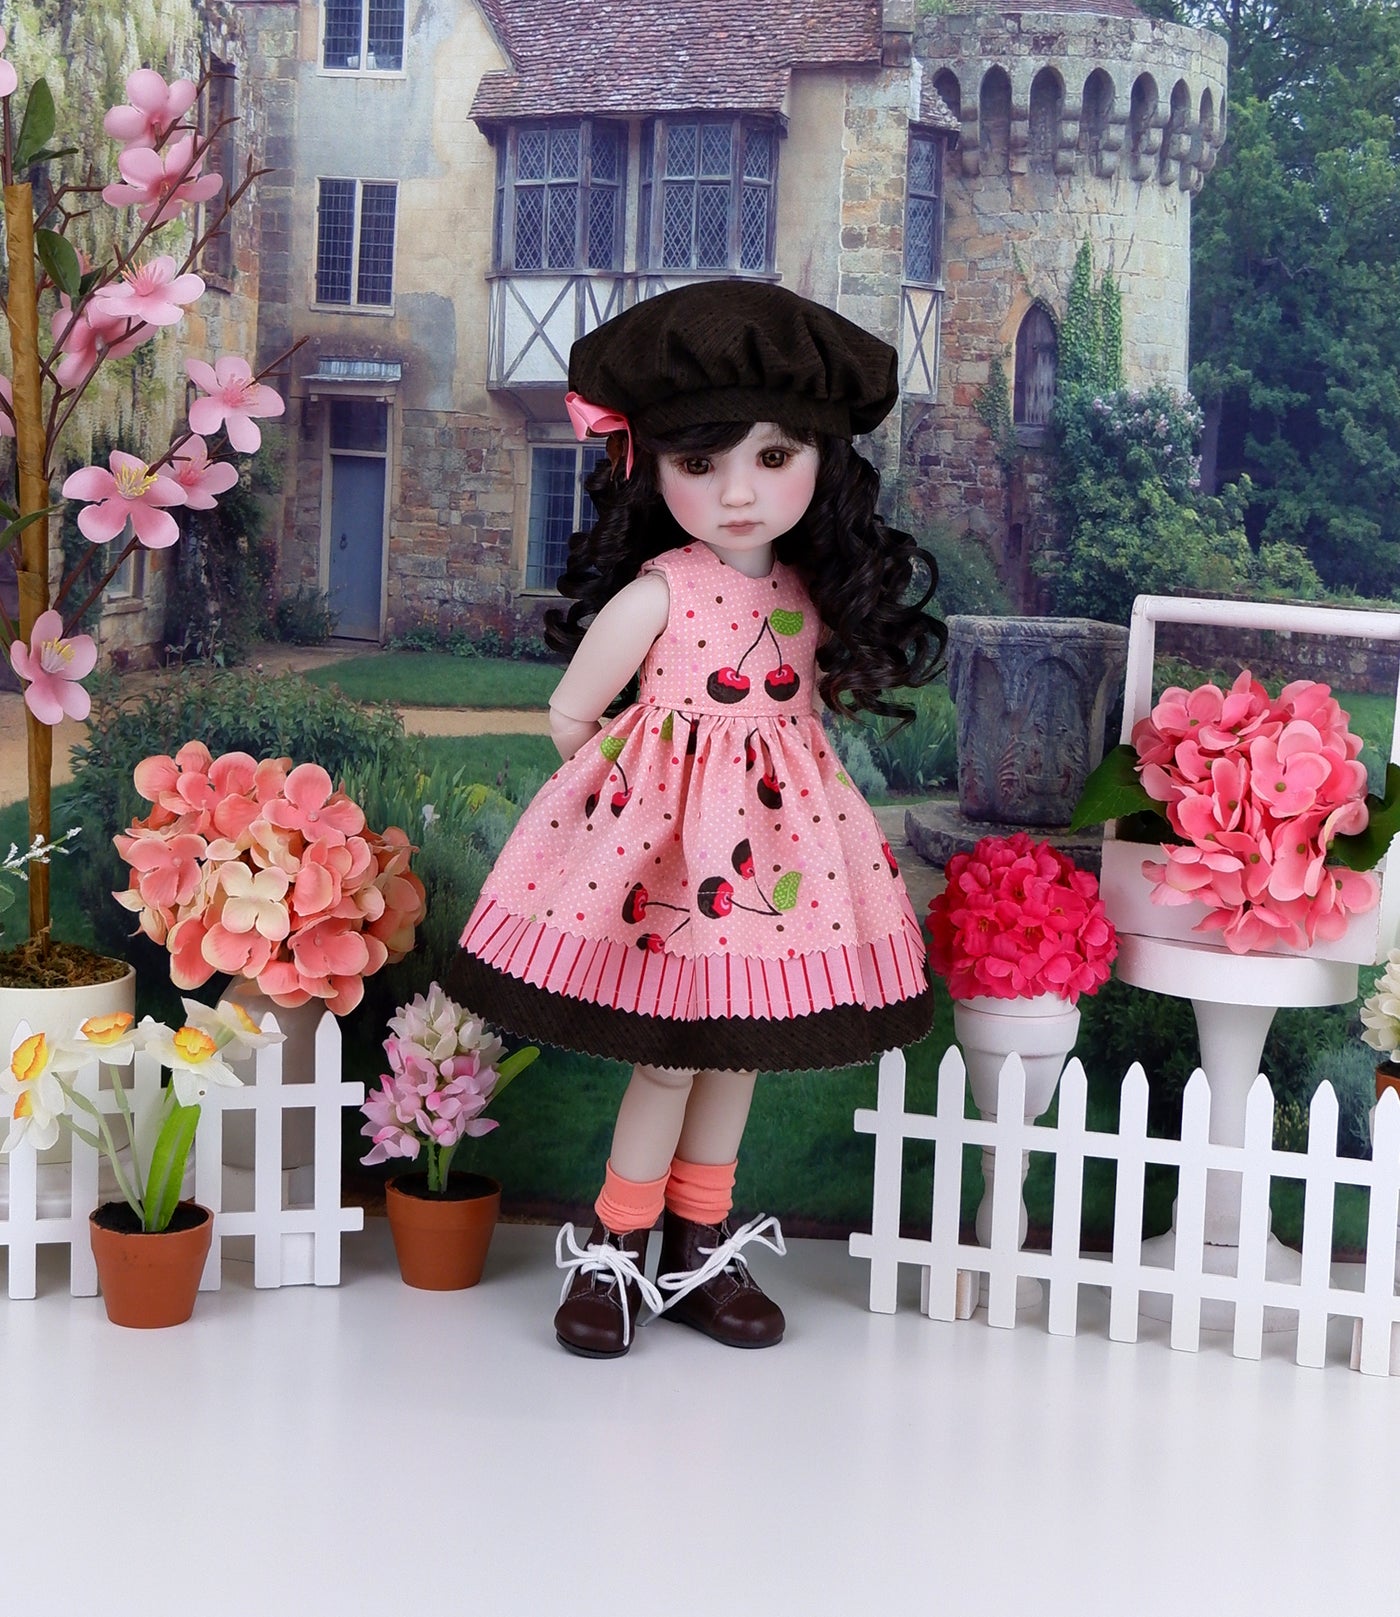 Chocolate Covered Cherry - dress with boots for Ruby Red Fashion Friends doll